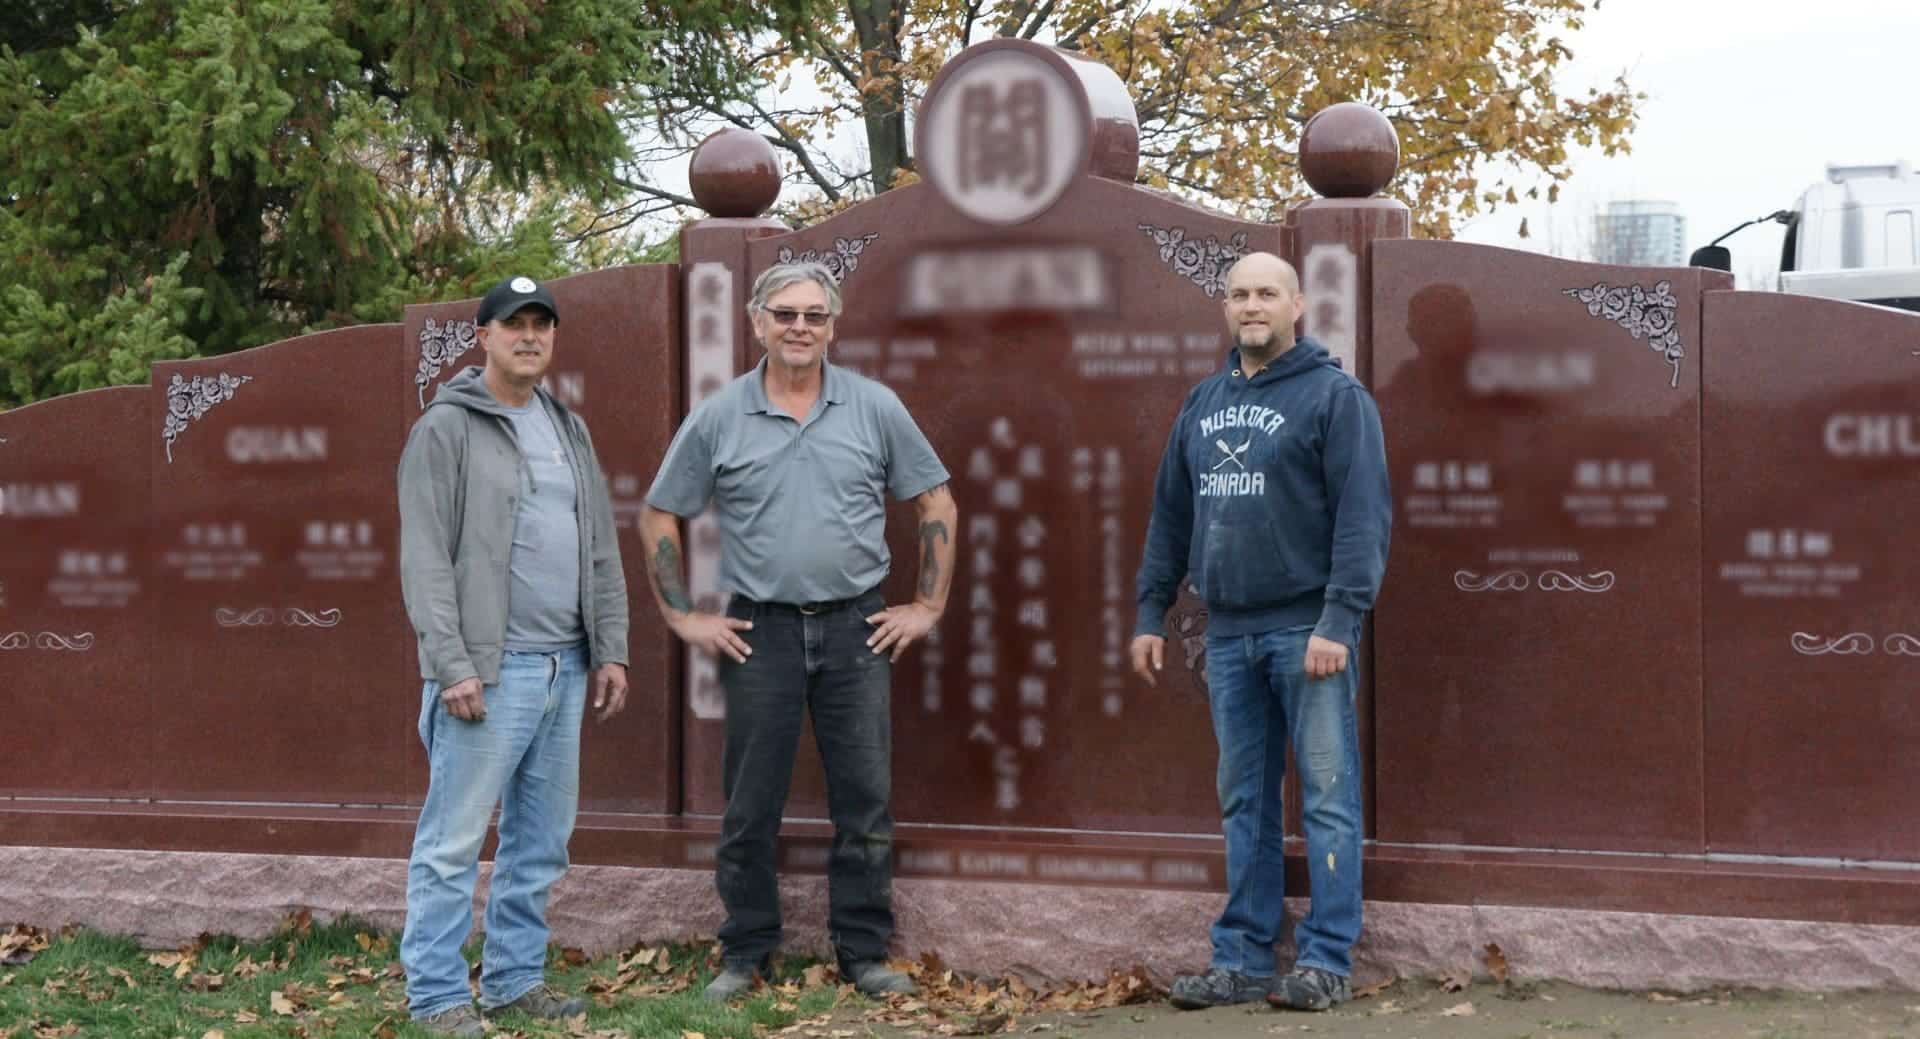 HGH Granite team completing a cemetery monument installation